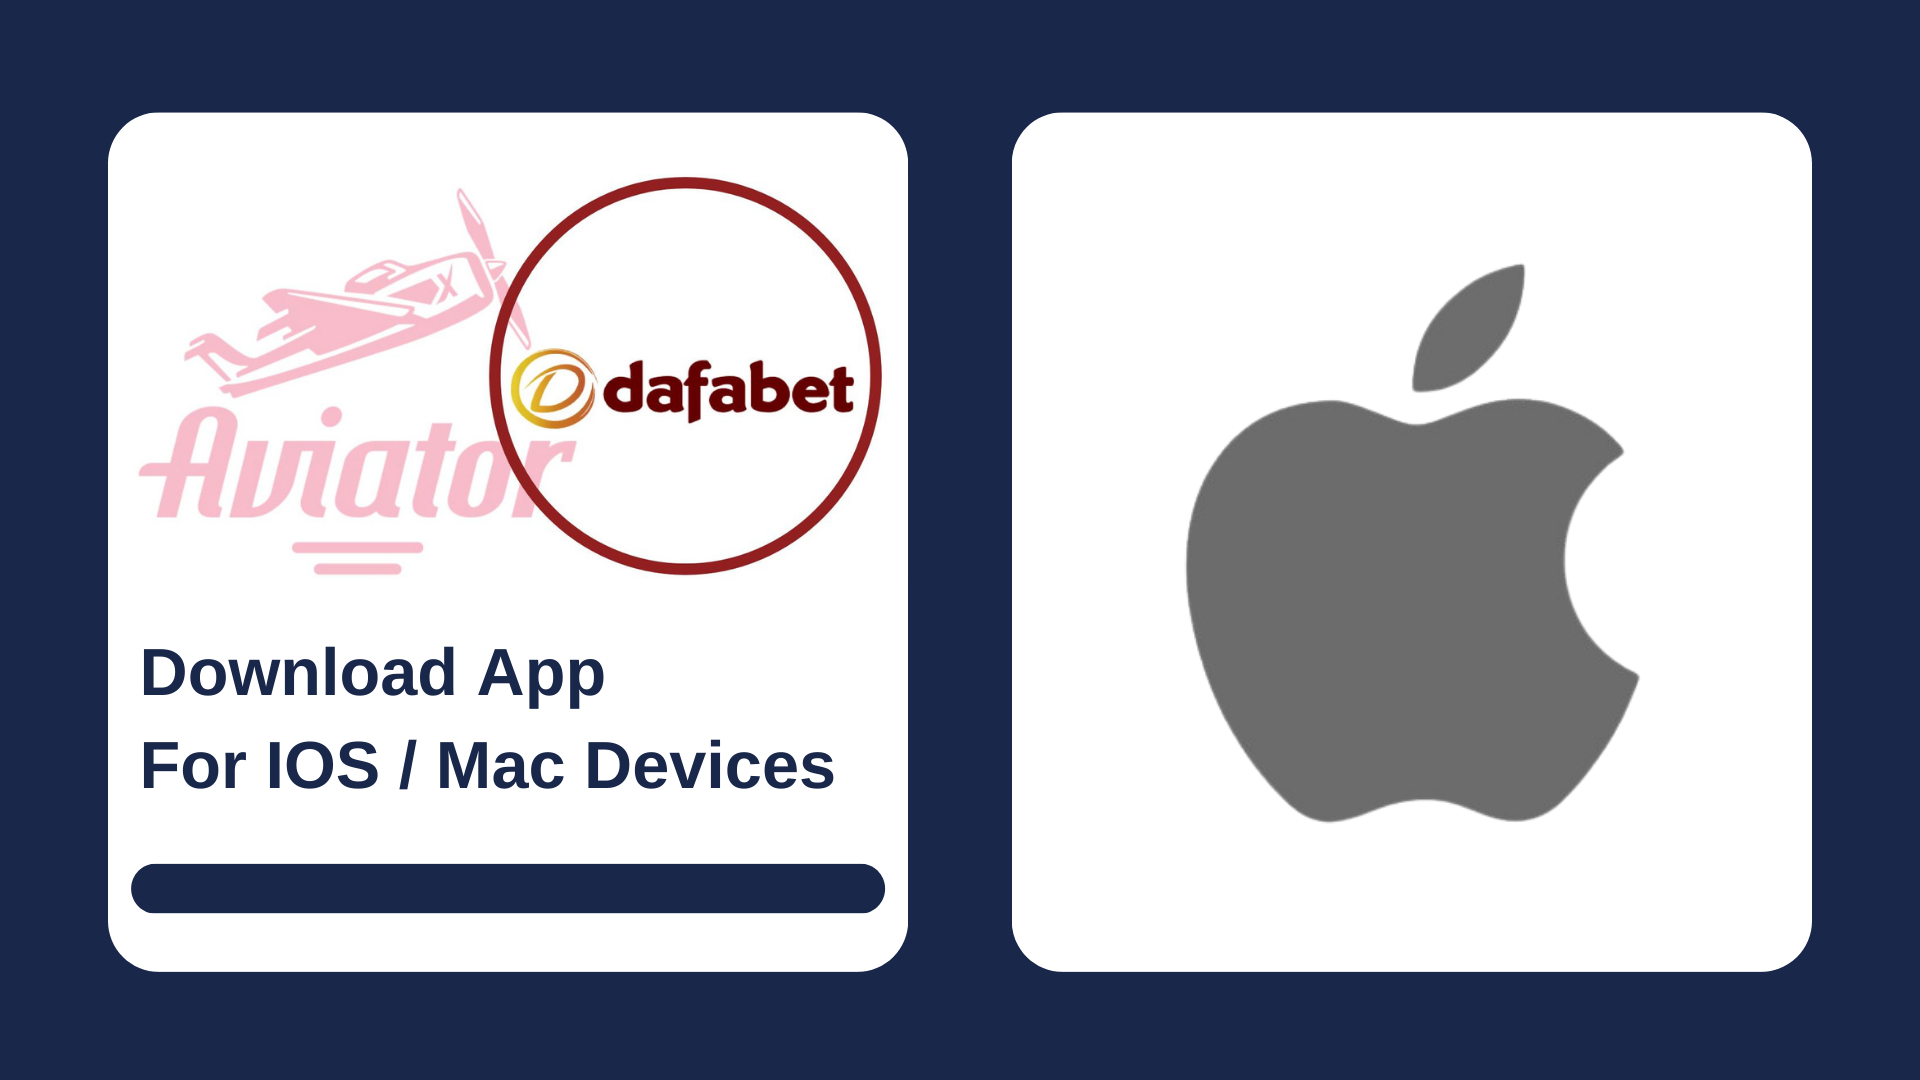 First picture showing Aviator and Dafabet logos with text, and second - IOS icon